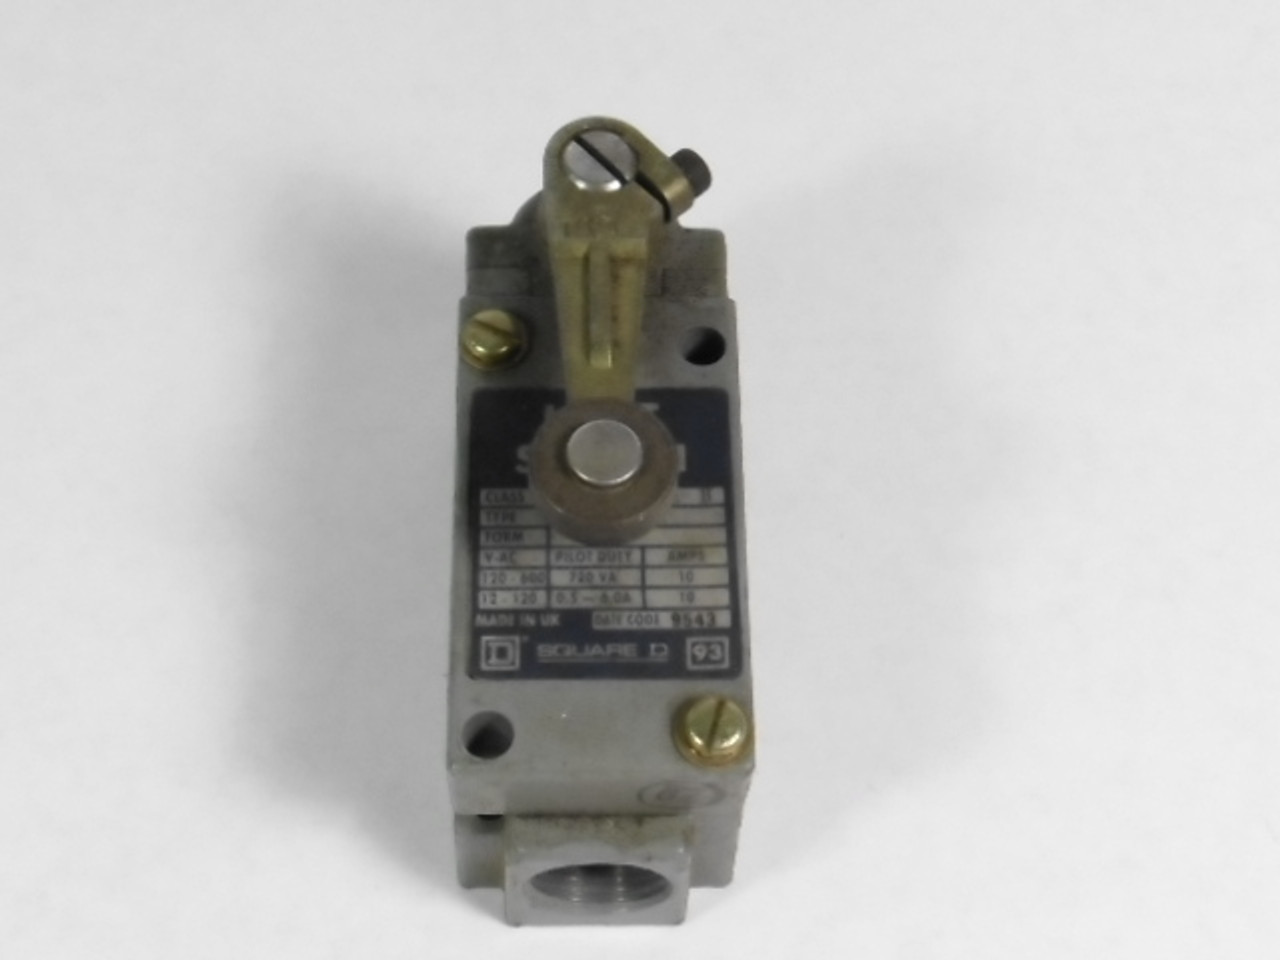 Square D 9007-B62C Limit Switch 600V 10A Form M11 USED